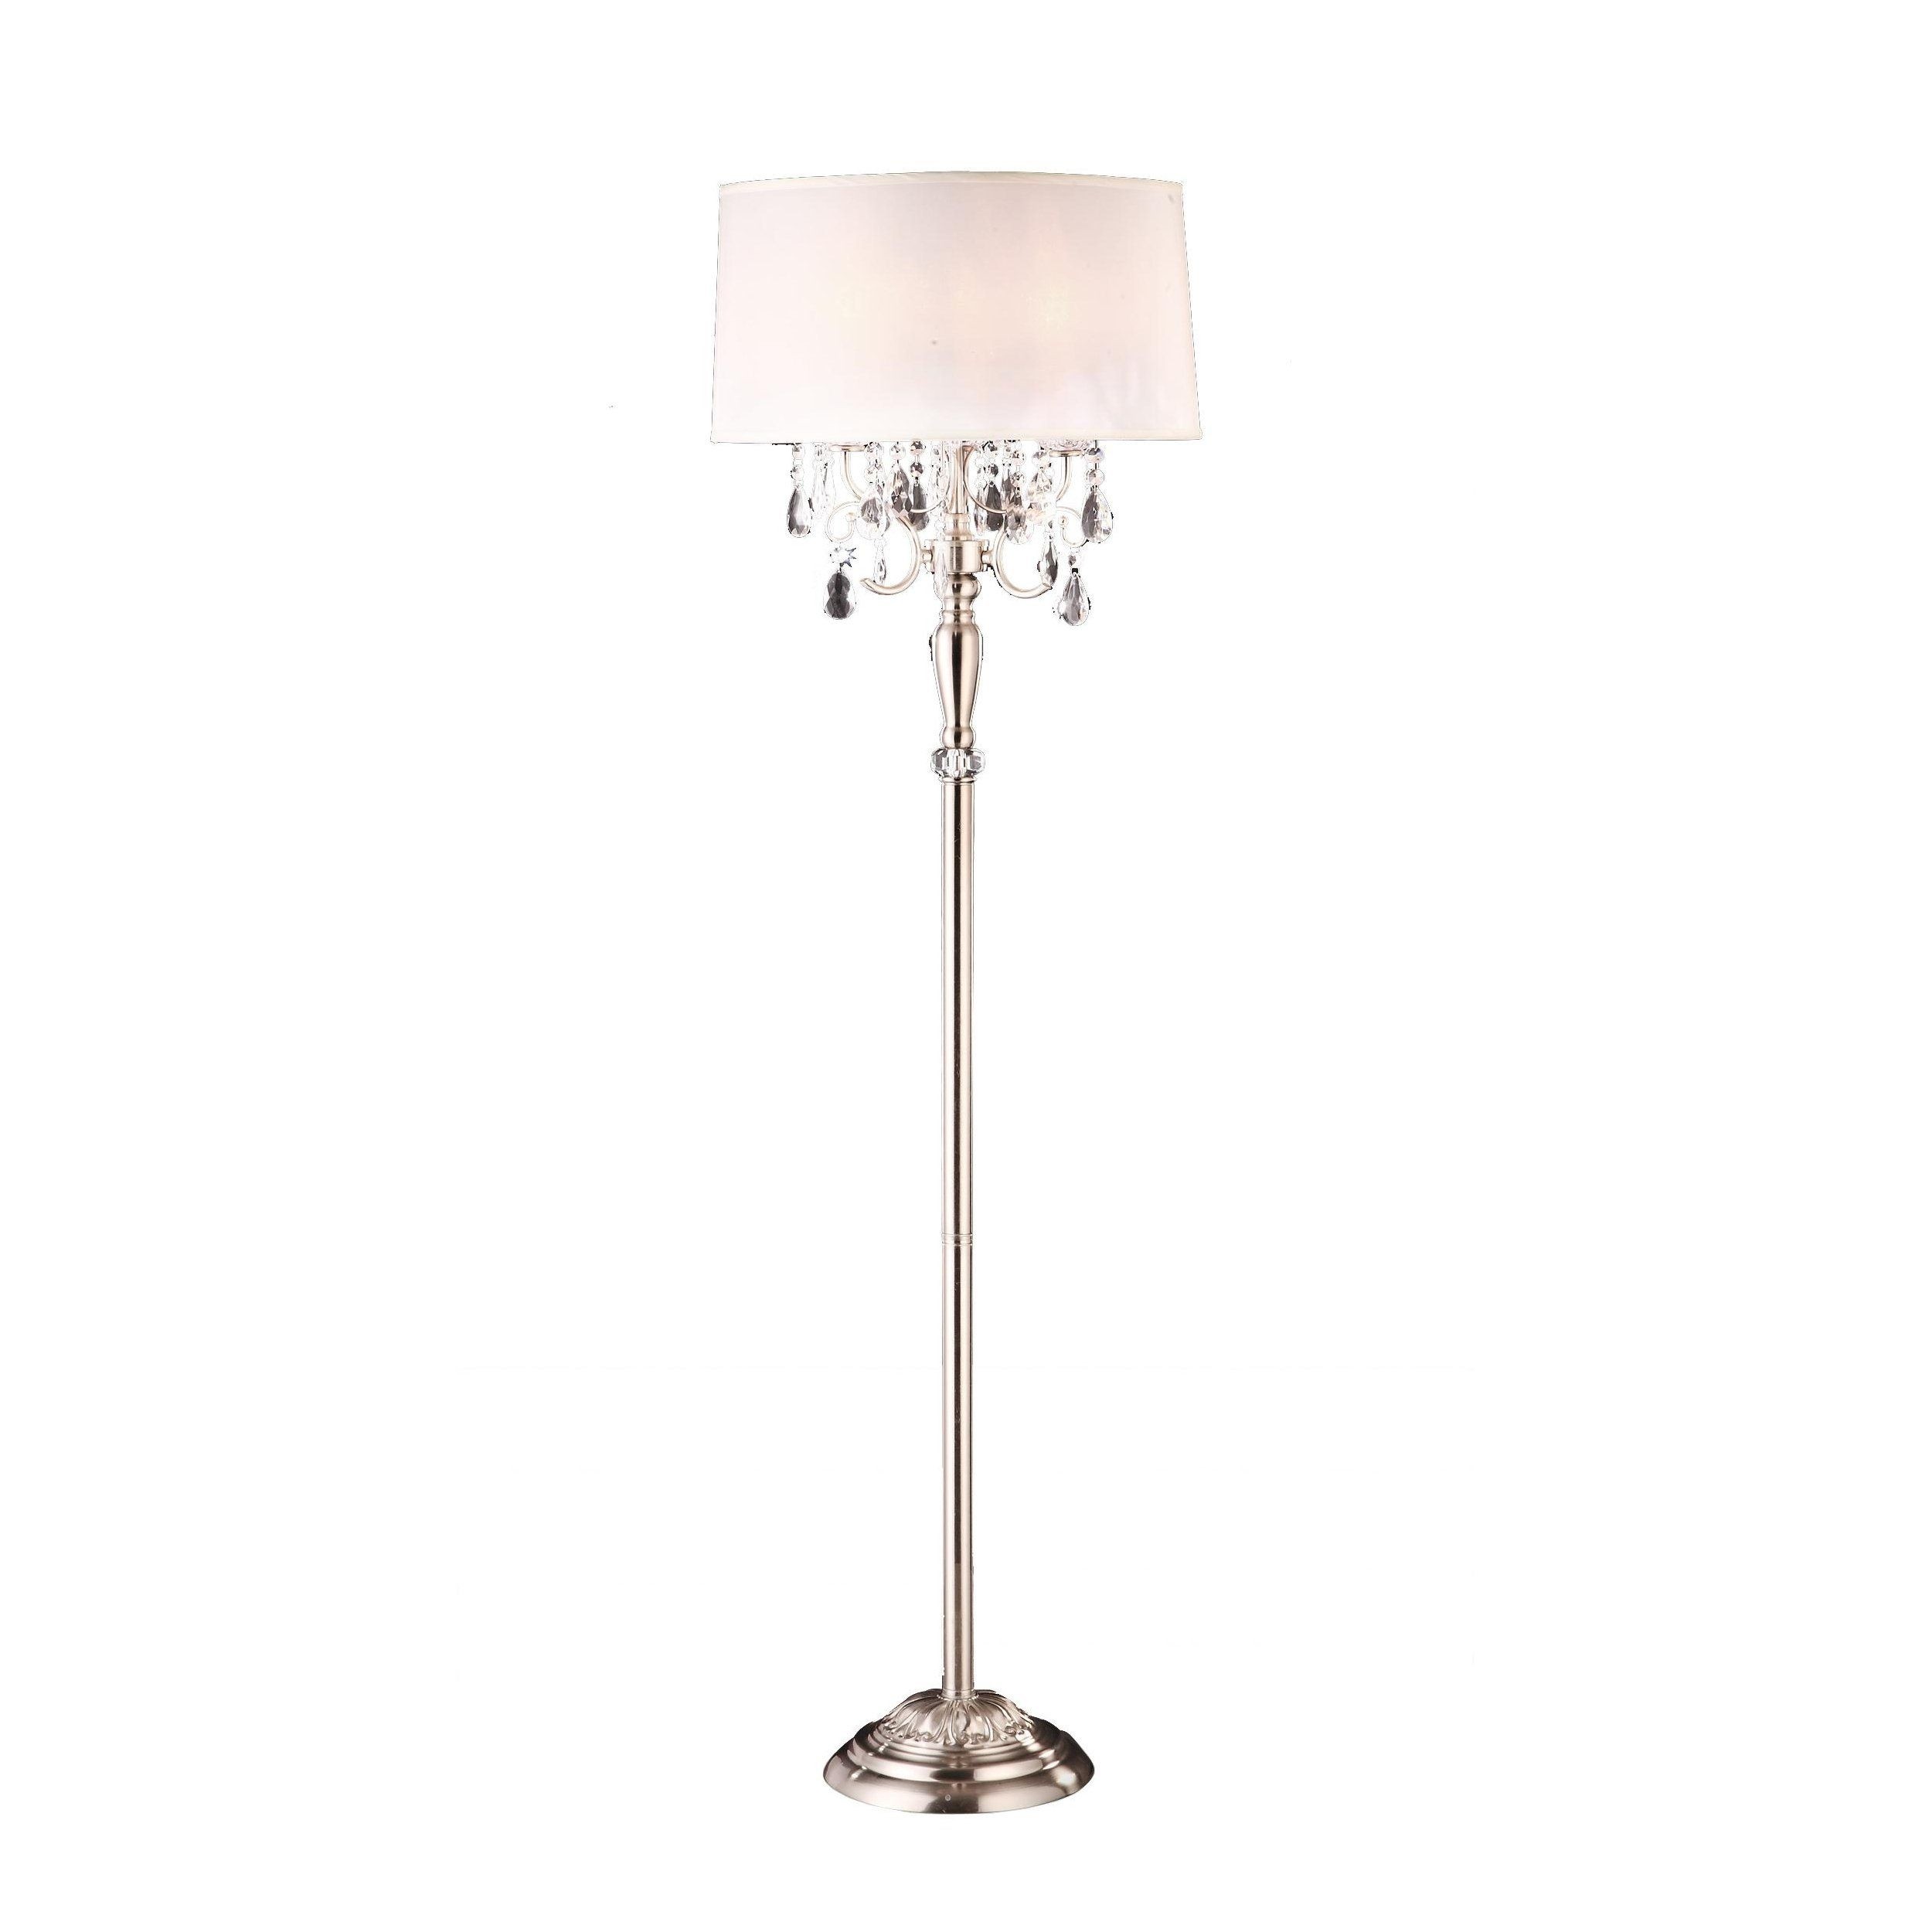 62"h Crystal Chandelier Floor Lamp White Shade on a Brush Silver Metal Body#ok5109f